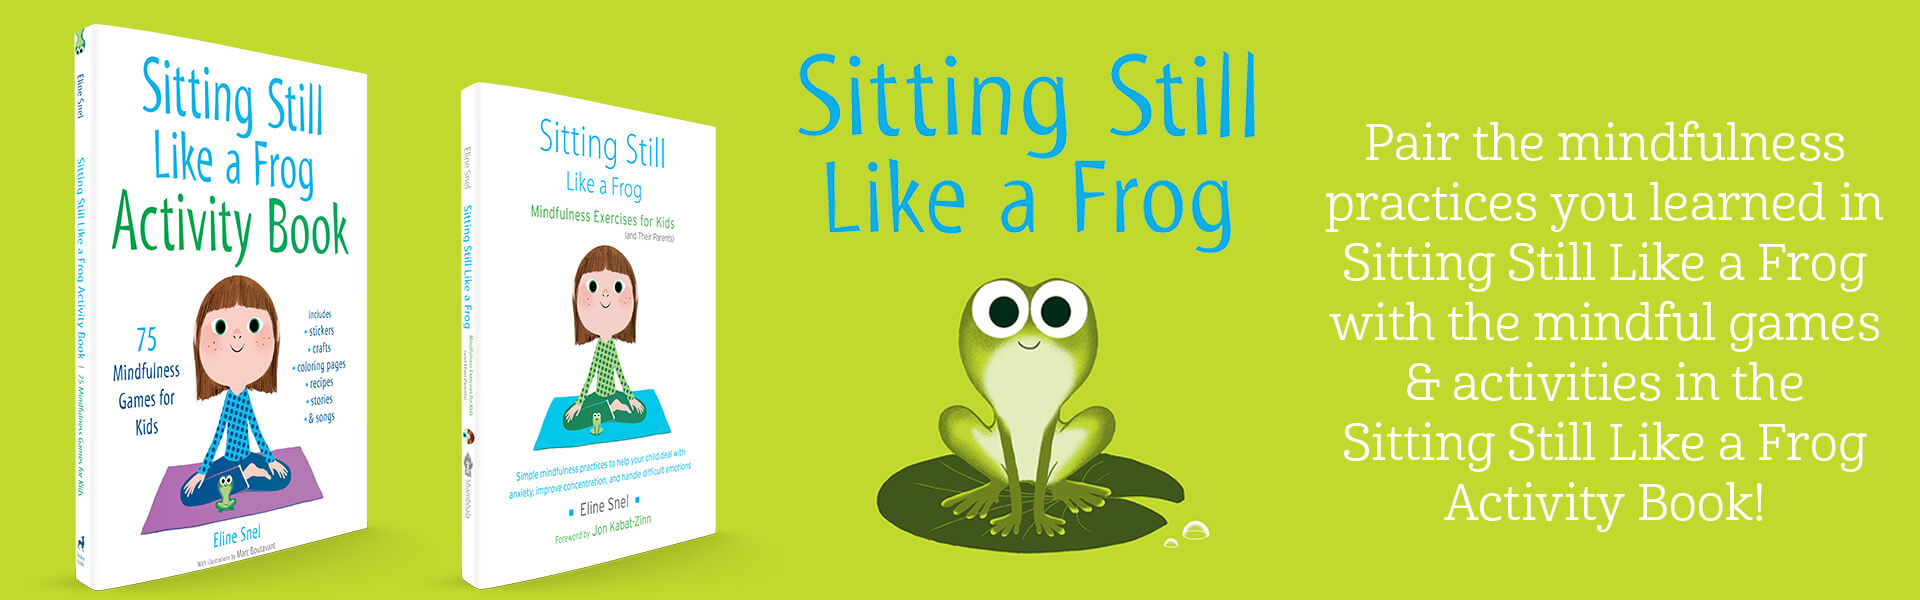 Sitting Still Like a Frog and Sitting Still Like a Frog Activity Book Audio Exercises